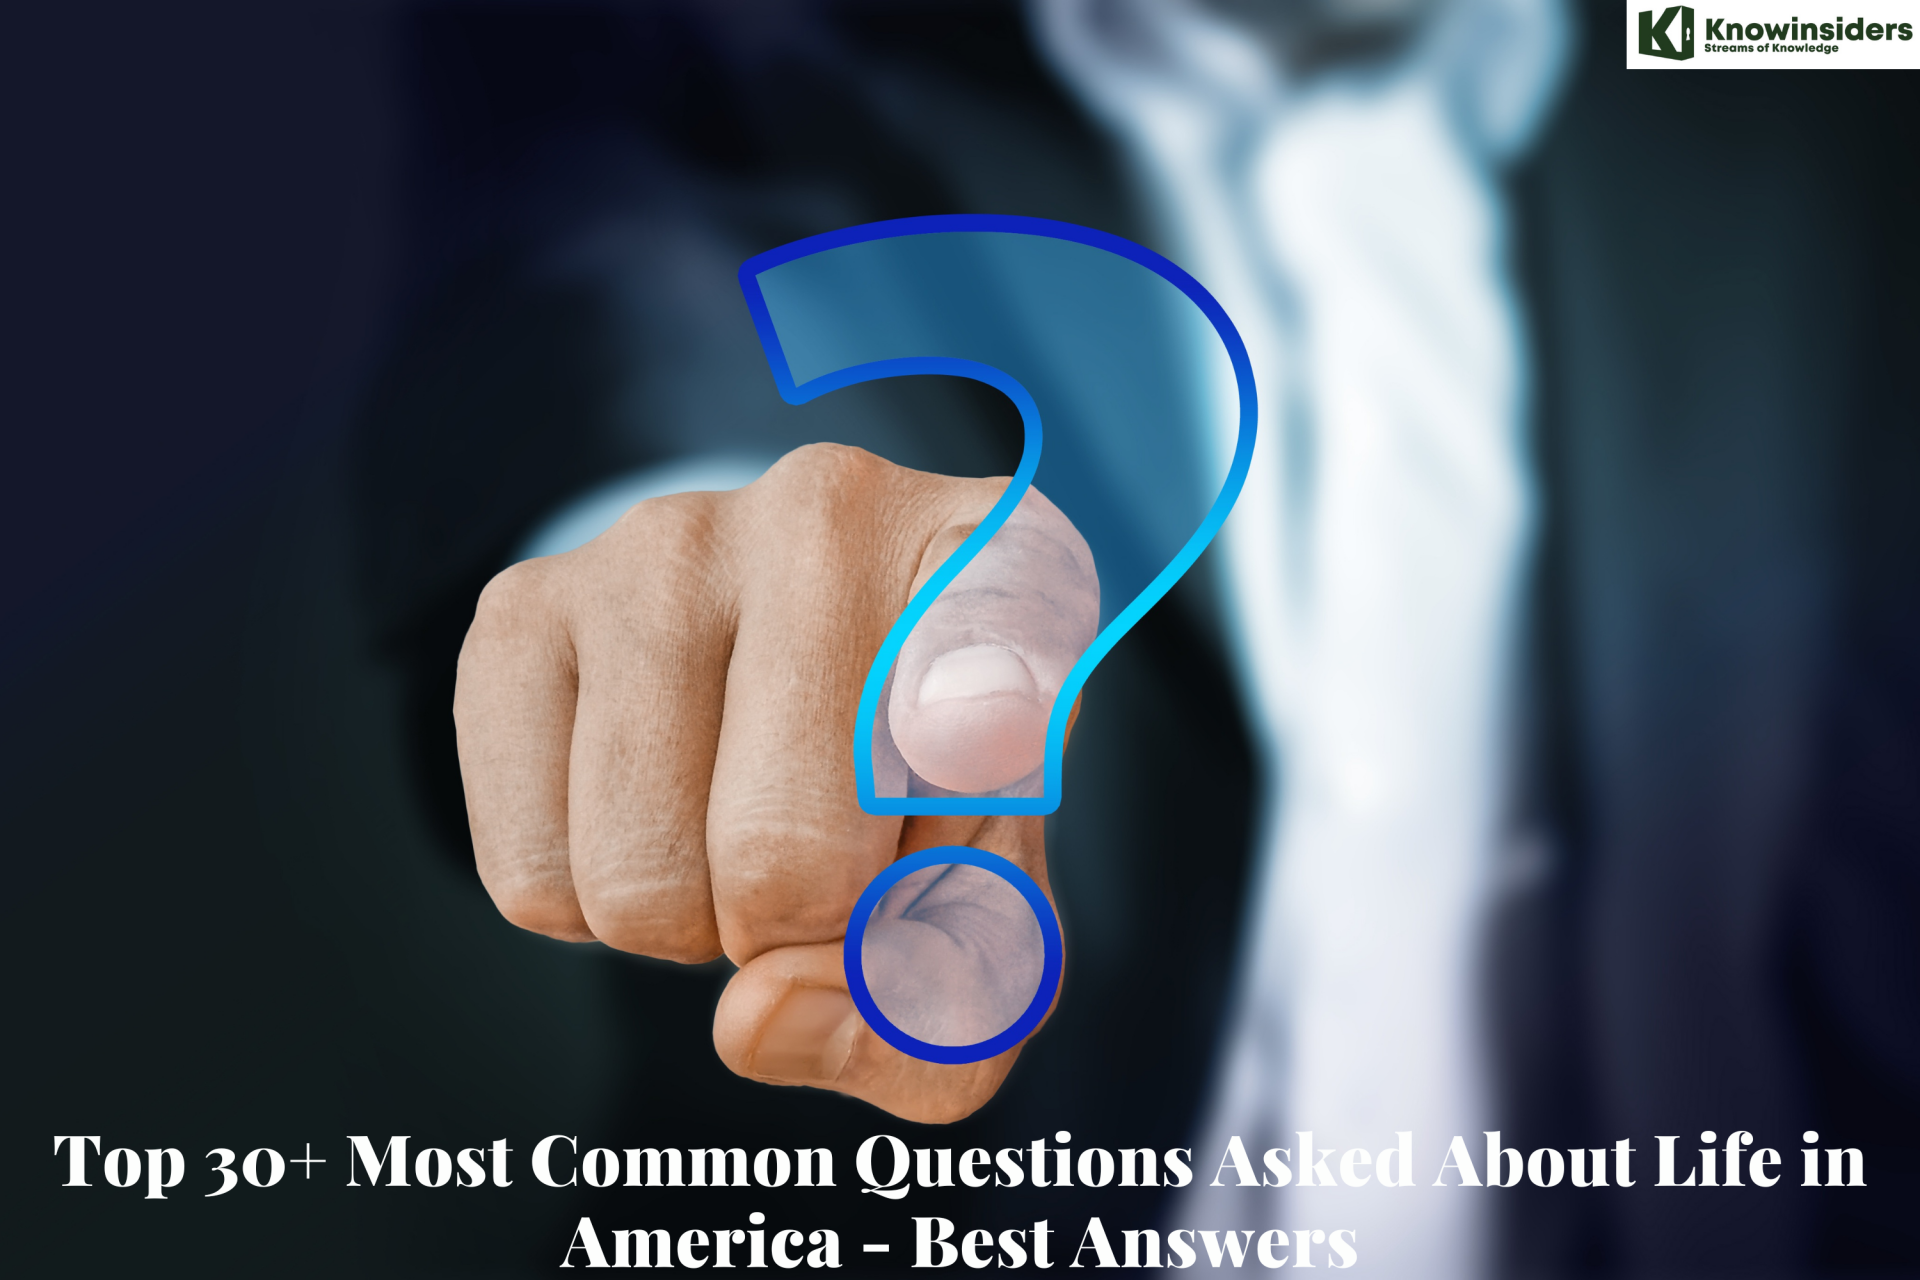 Top 30+ Most Common Questions Asked About Life in America - Best Answers